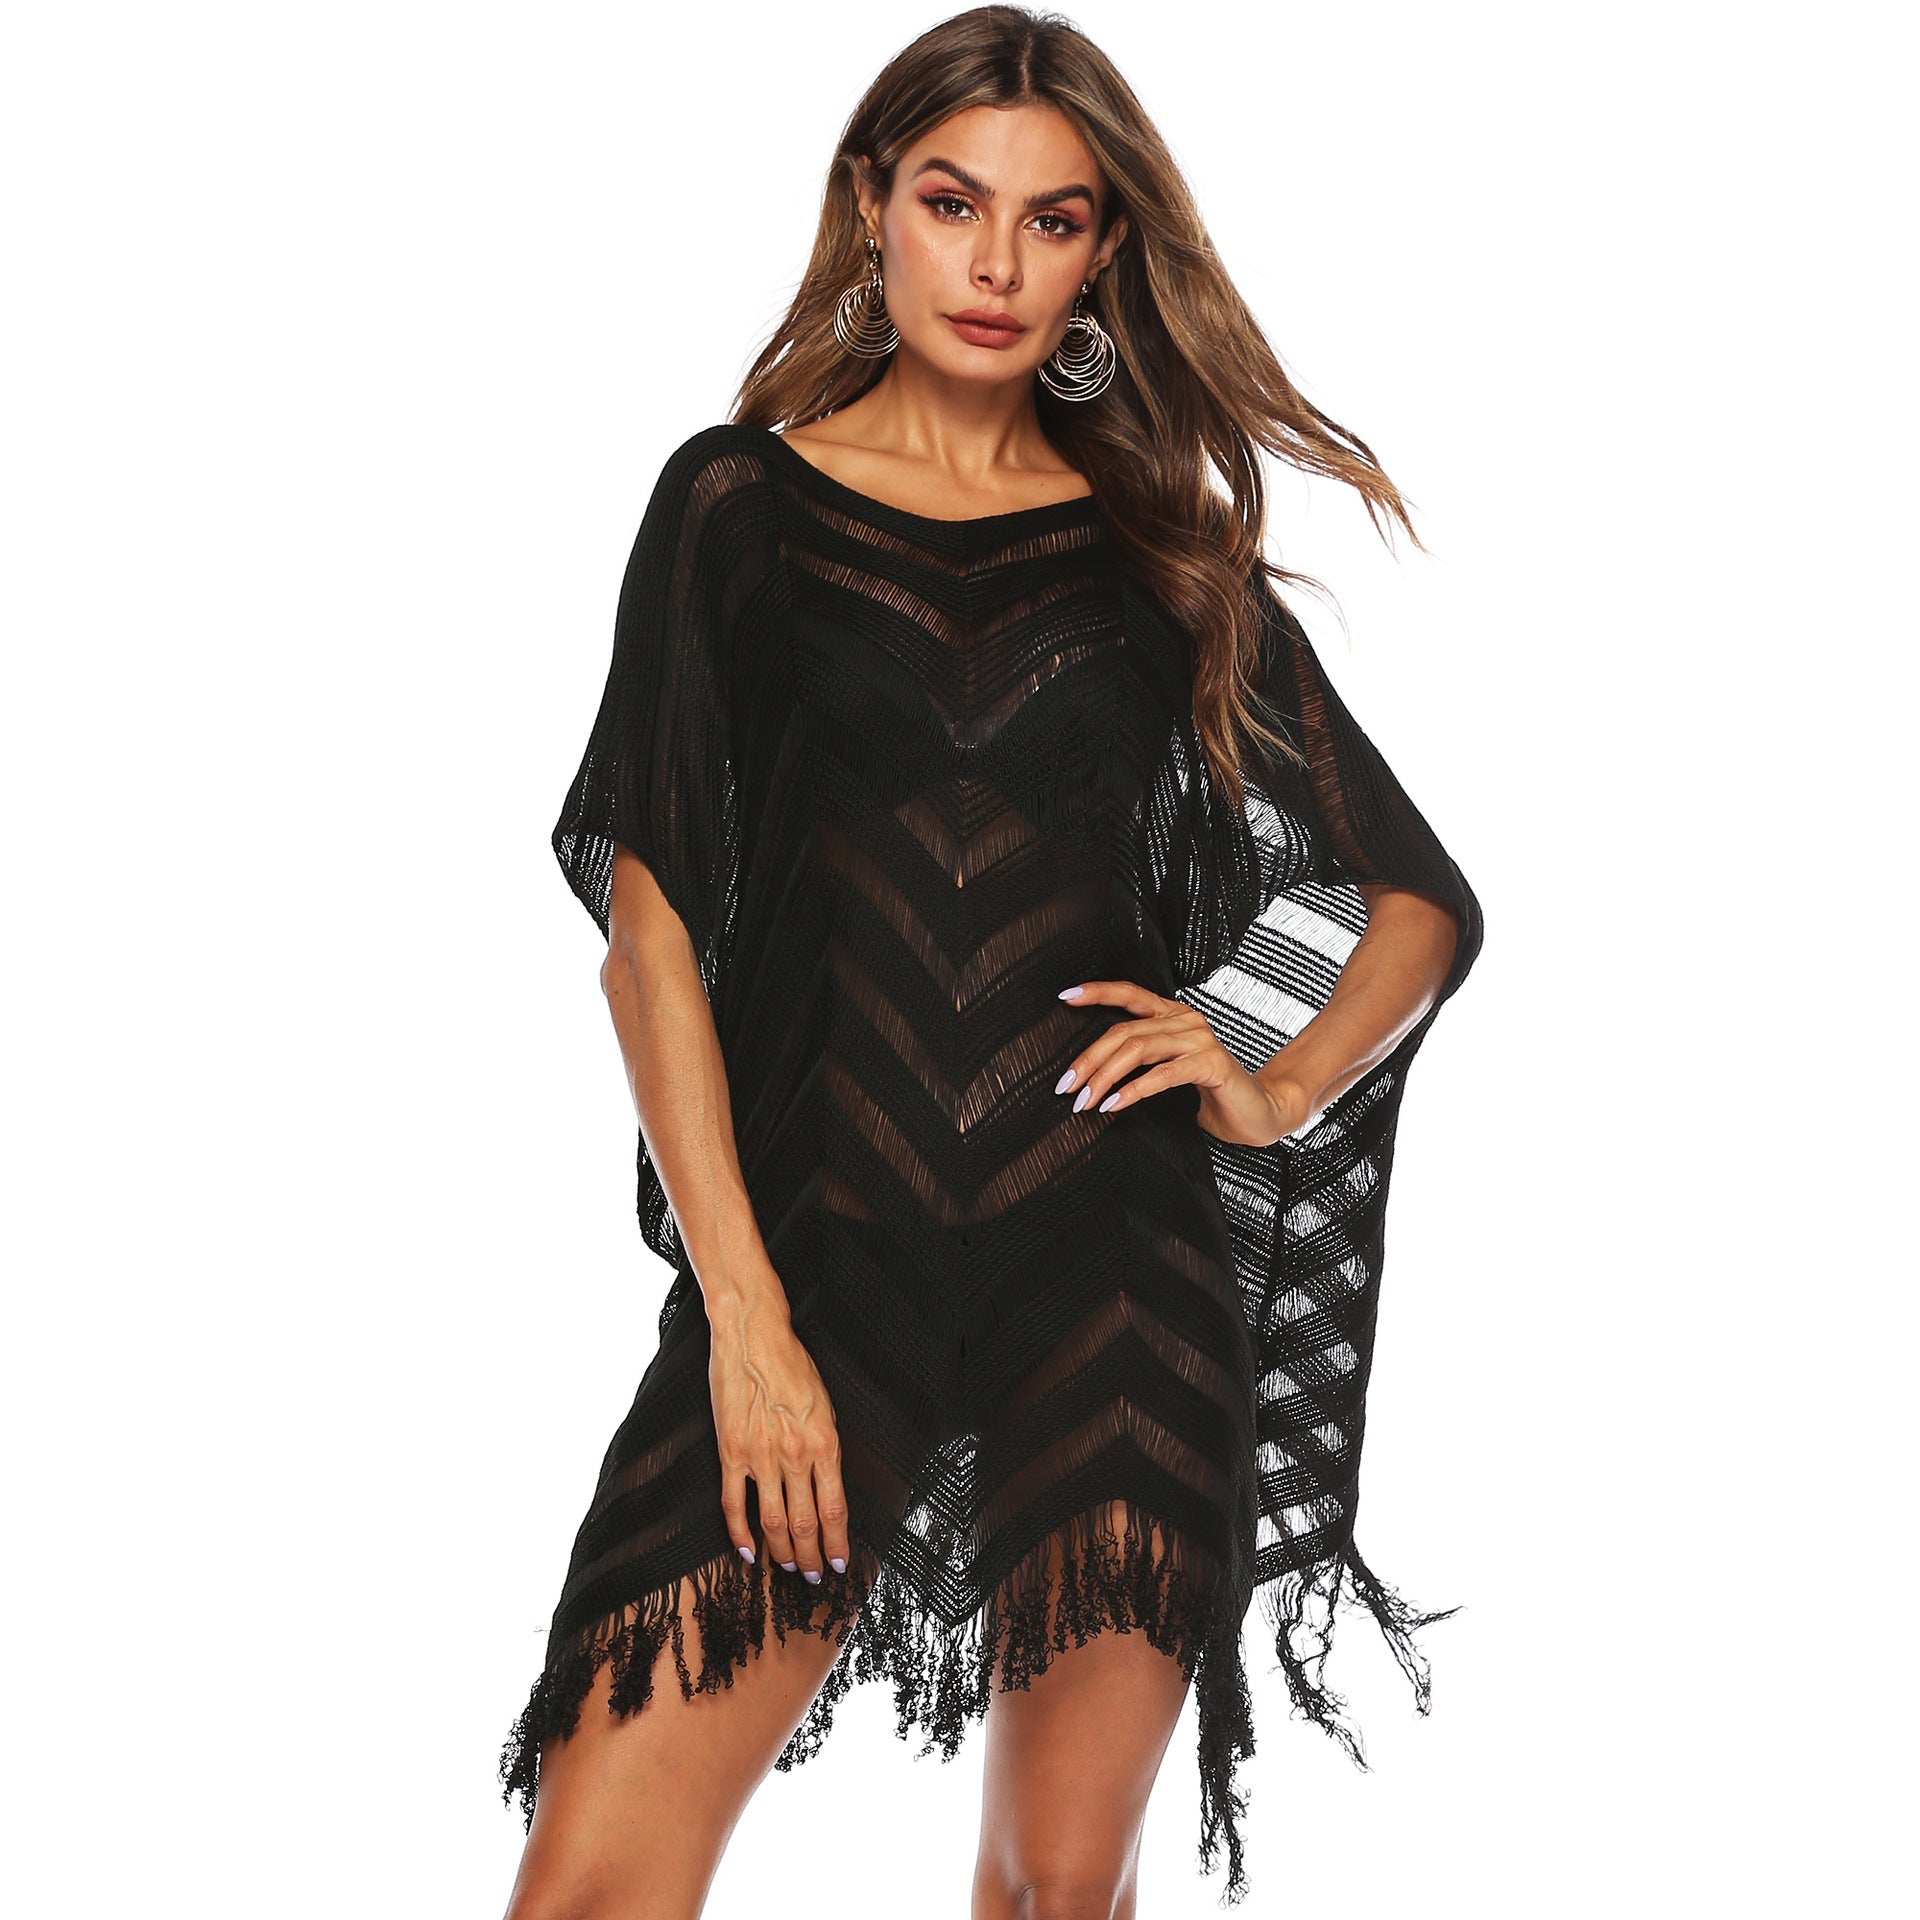 Black Off The Shoulder Tassels Summer Beach Cover Ups-Swimwear-Black-One Size-Free Shipping at meselling99